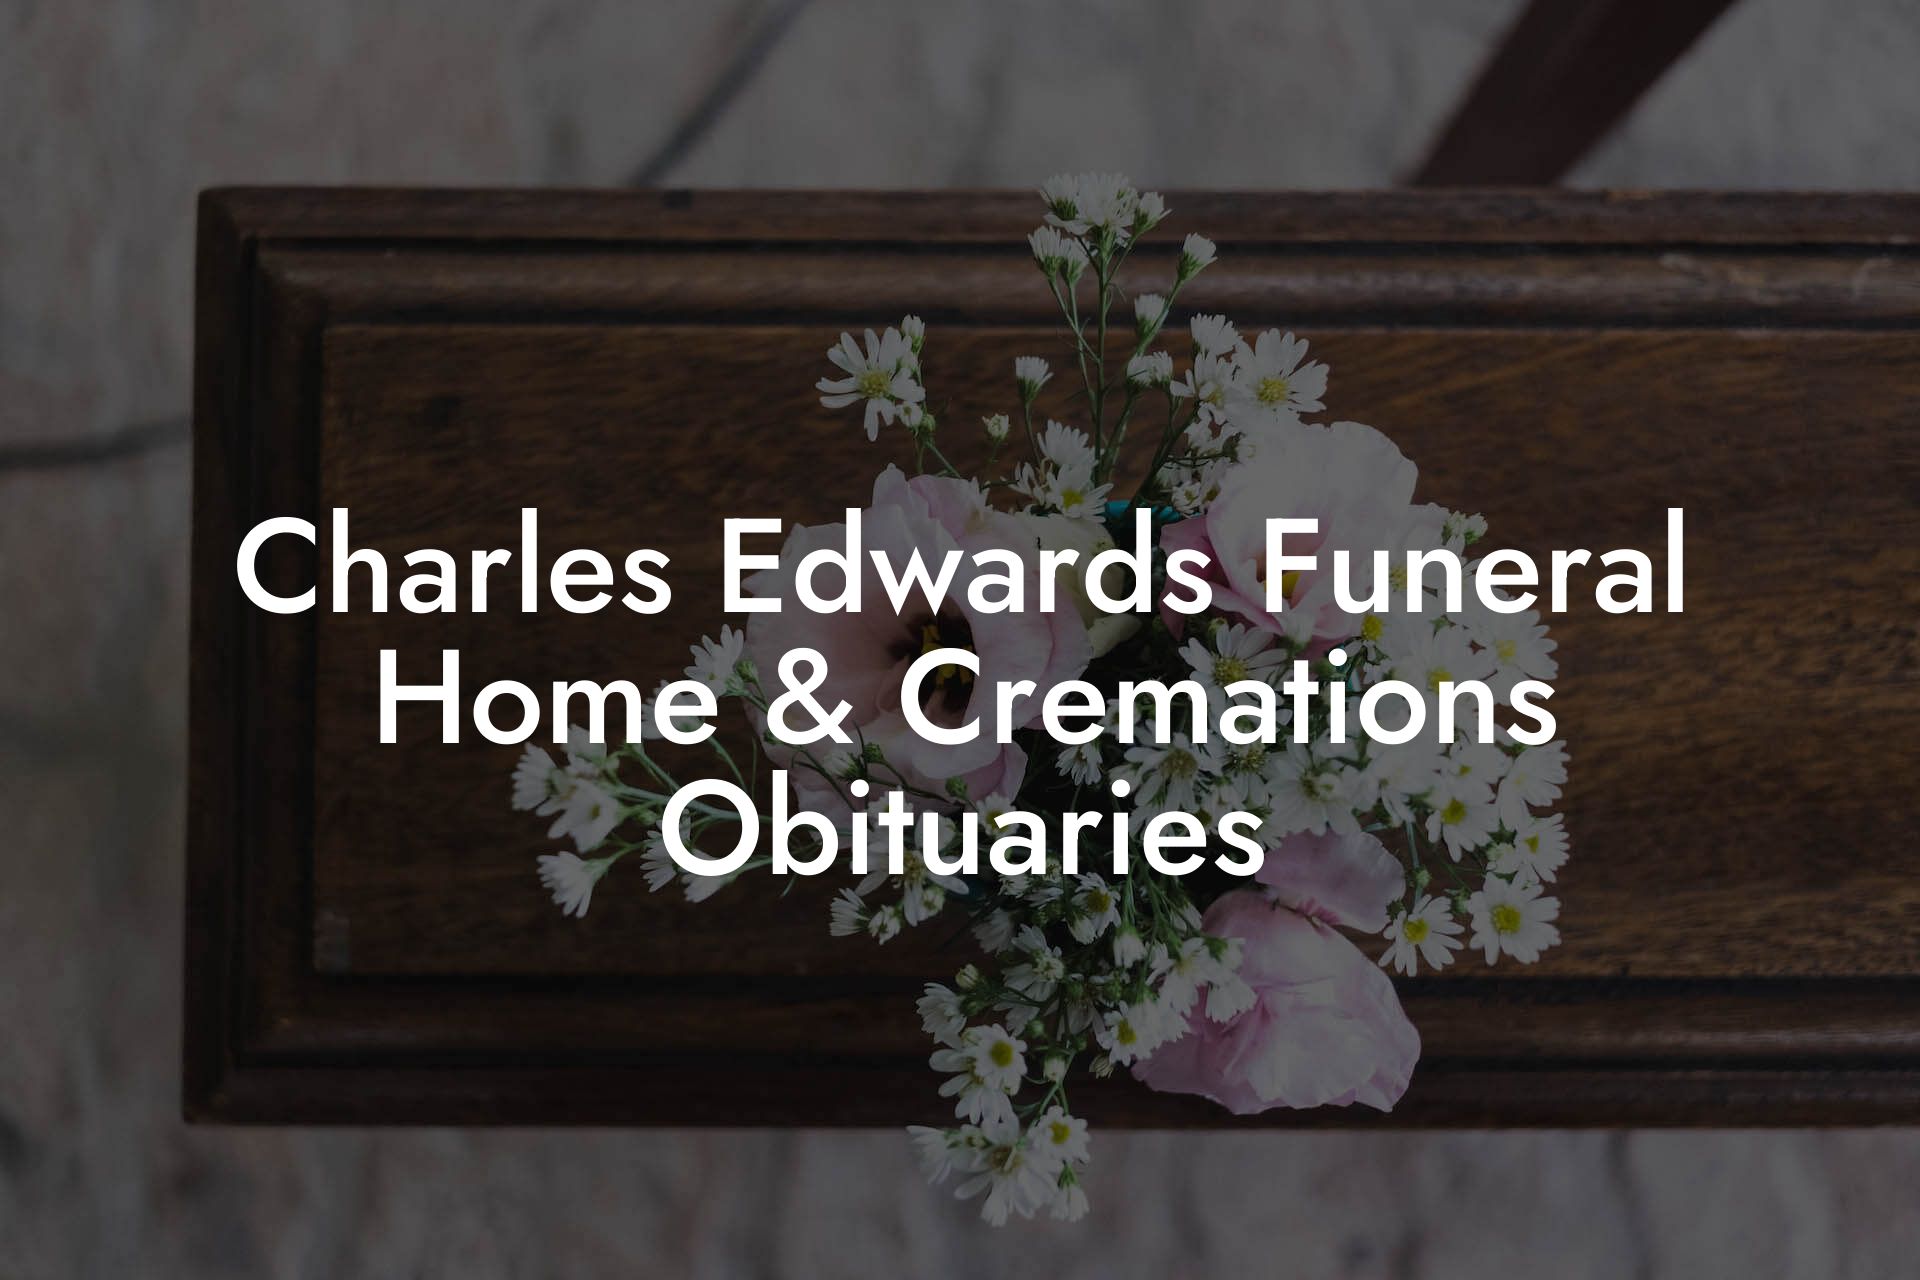 Charles Edwards Funeral Home & Cremations Obituaries